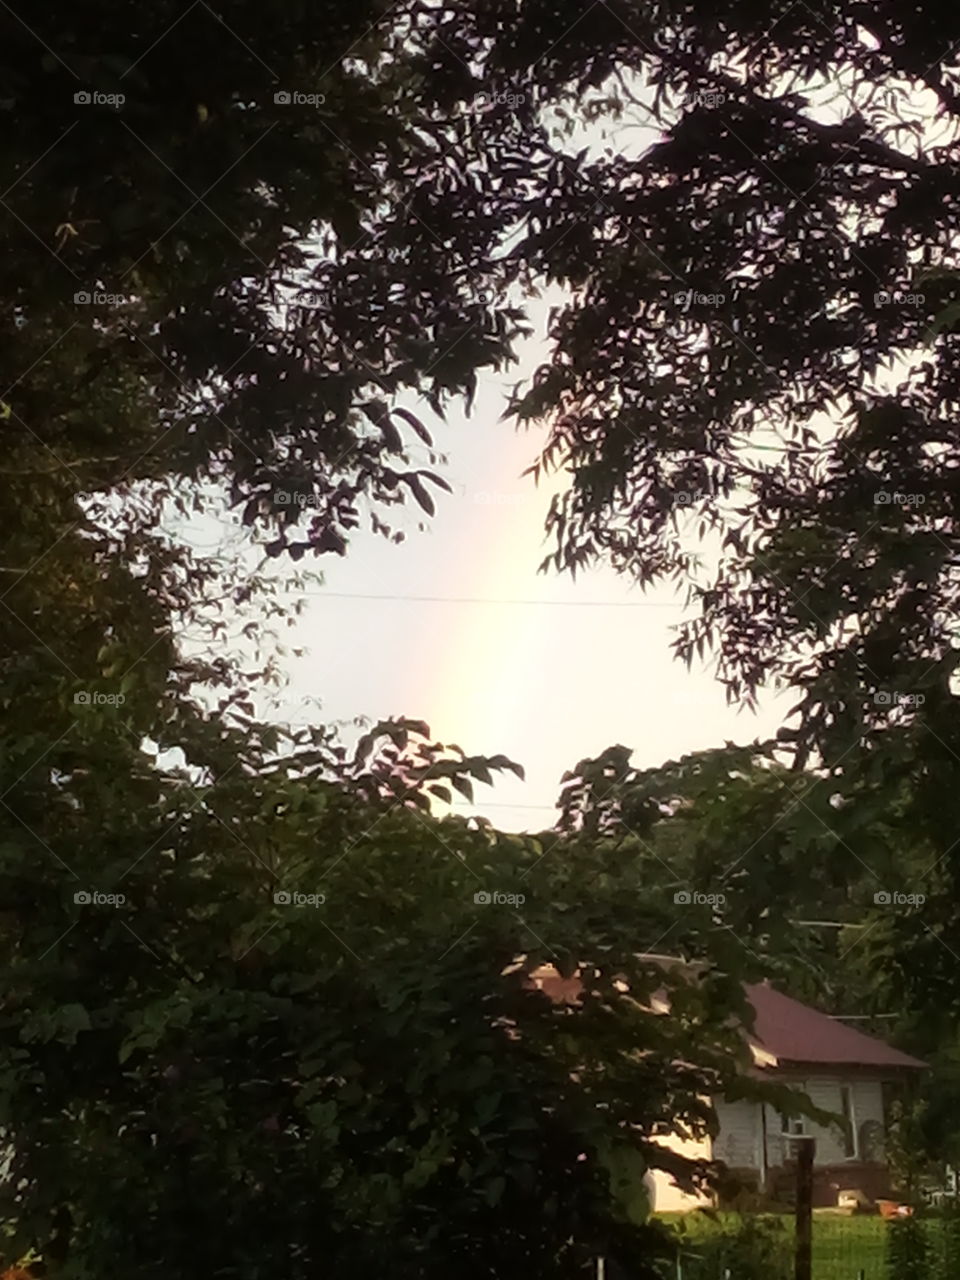 my rainbow farther away more trees and less rainbow remembering God's promise.